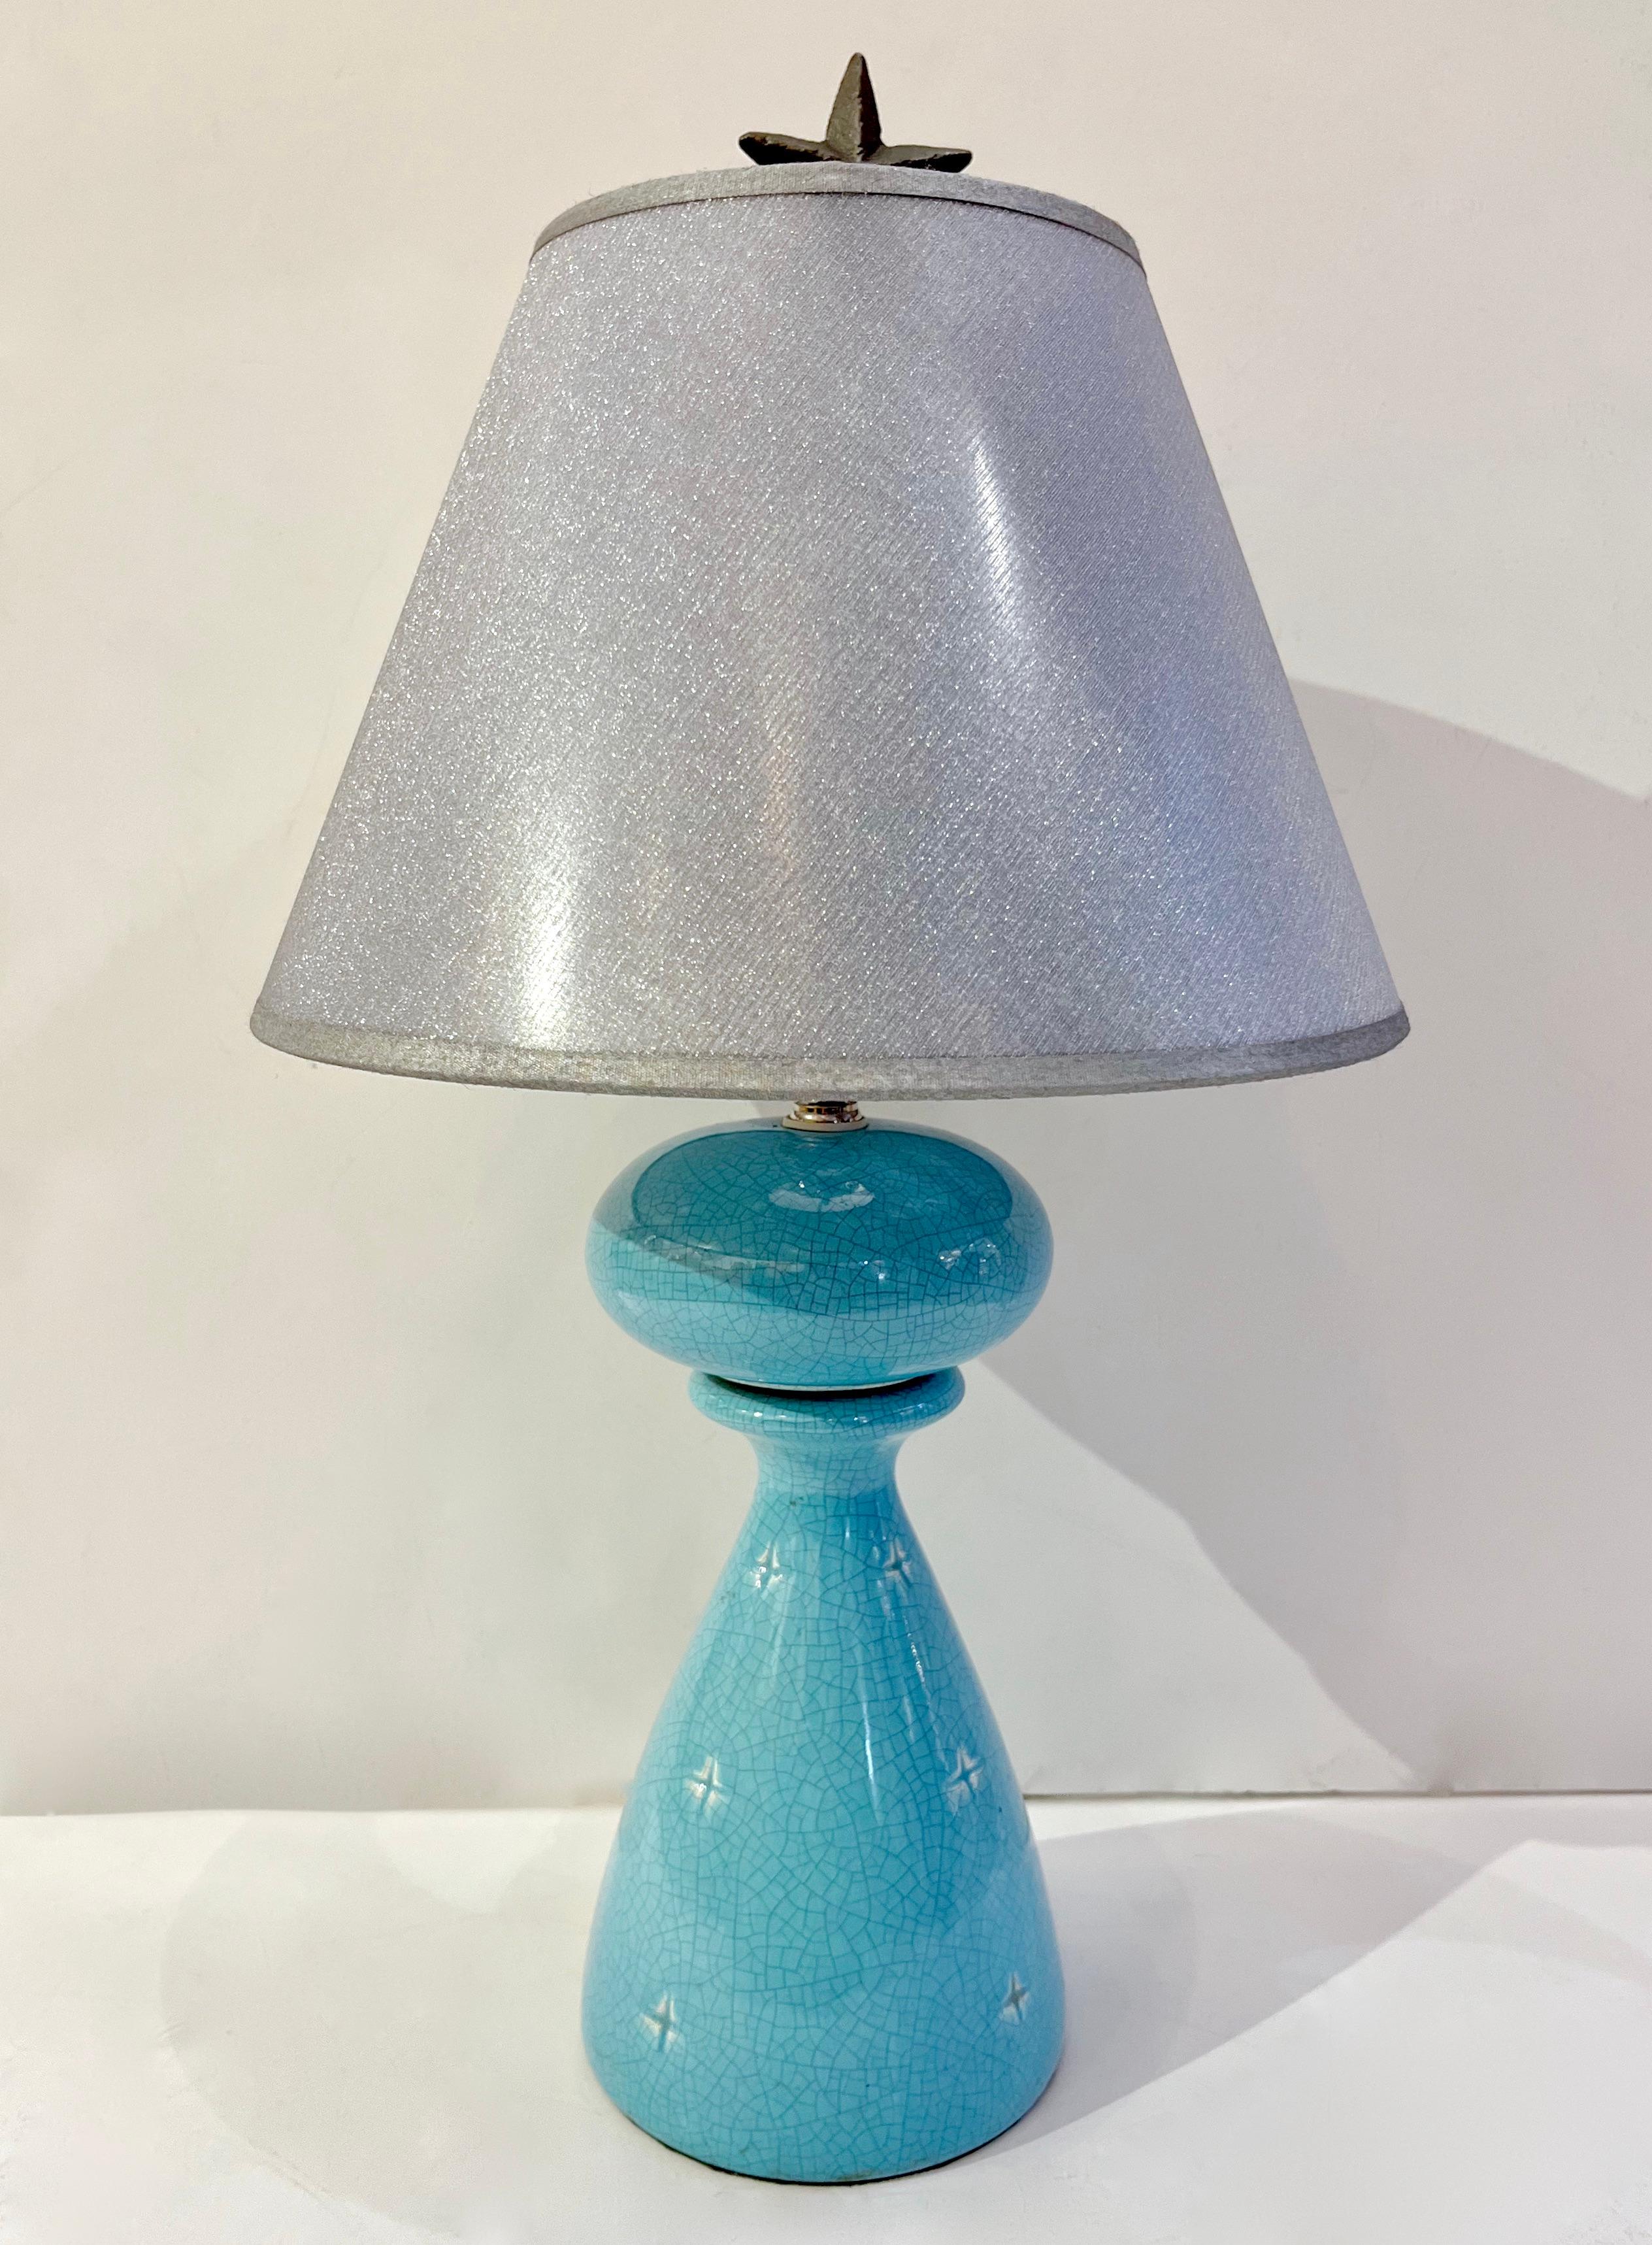 A delightful vintage pair of French ceramic table lamps with Art Deco flair worked with the craquele technique and decorated with indented stars in the bodies. The color in sky blue aquamarine adds to the desirability of these cute lamps, their size